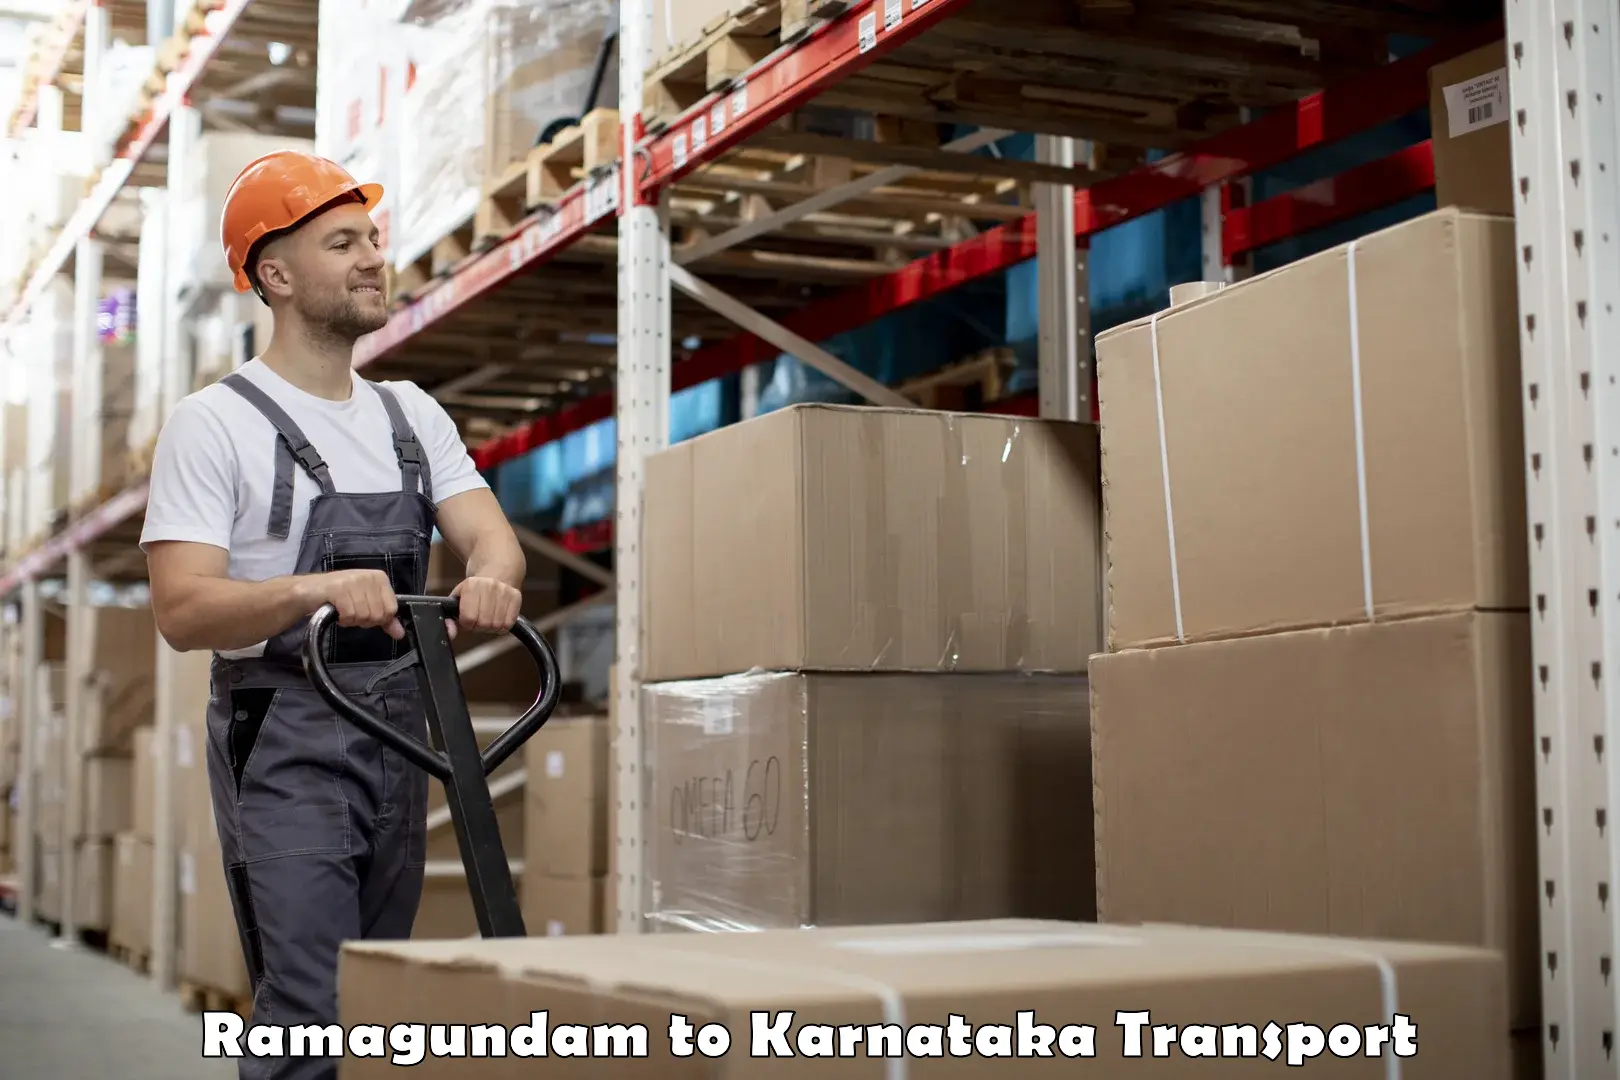 Truck transport companies in India Ramagundam to Channapatna